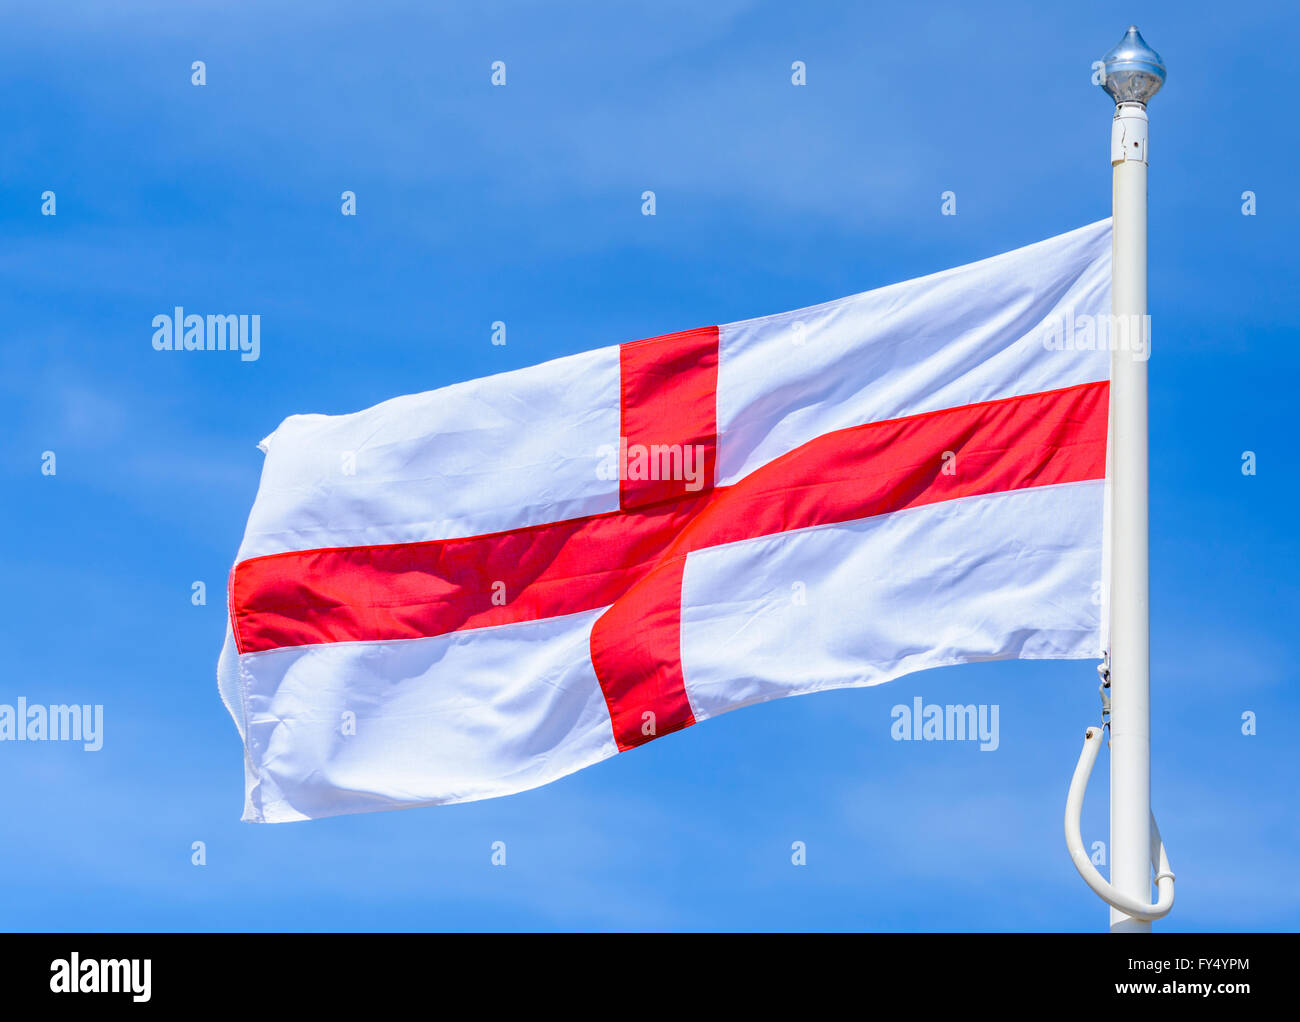 St Georges Cross flag, the flag of England, flying against blue sky. Stock Photo